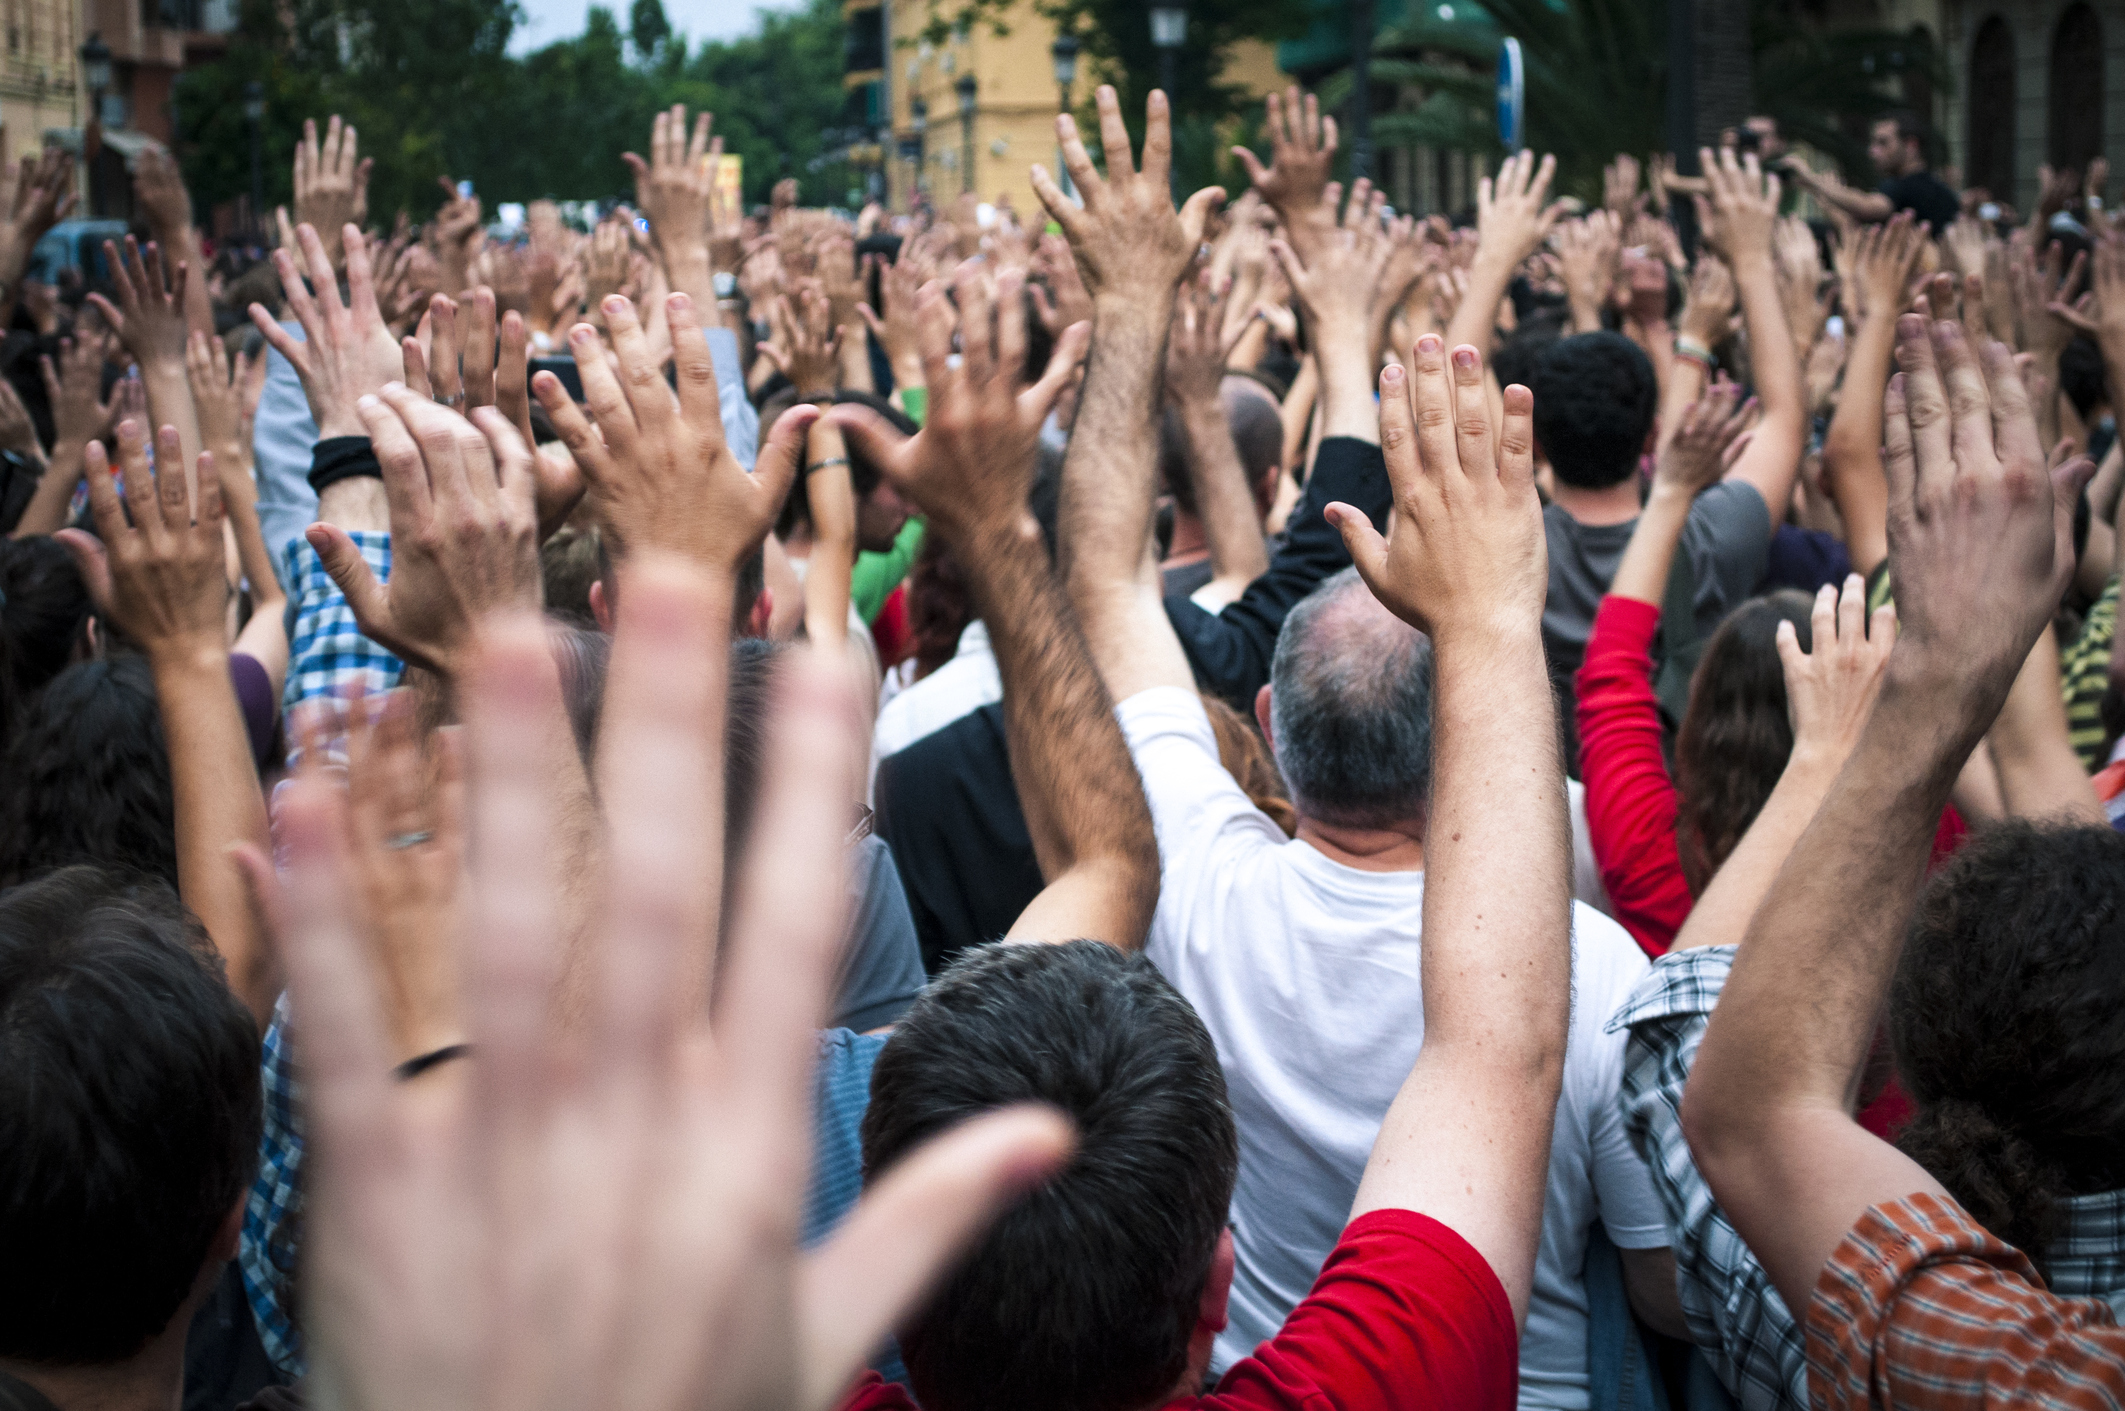 Image of a crowd of men outside having their backs turned to the camera and raising their hands.